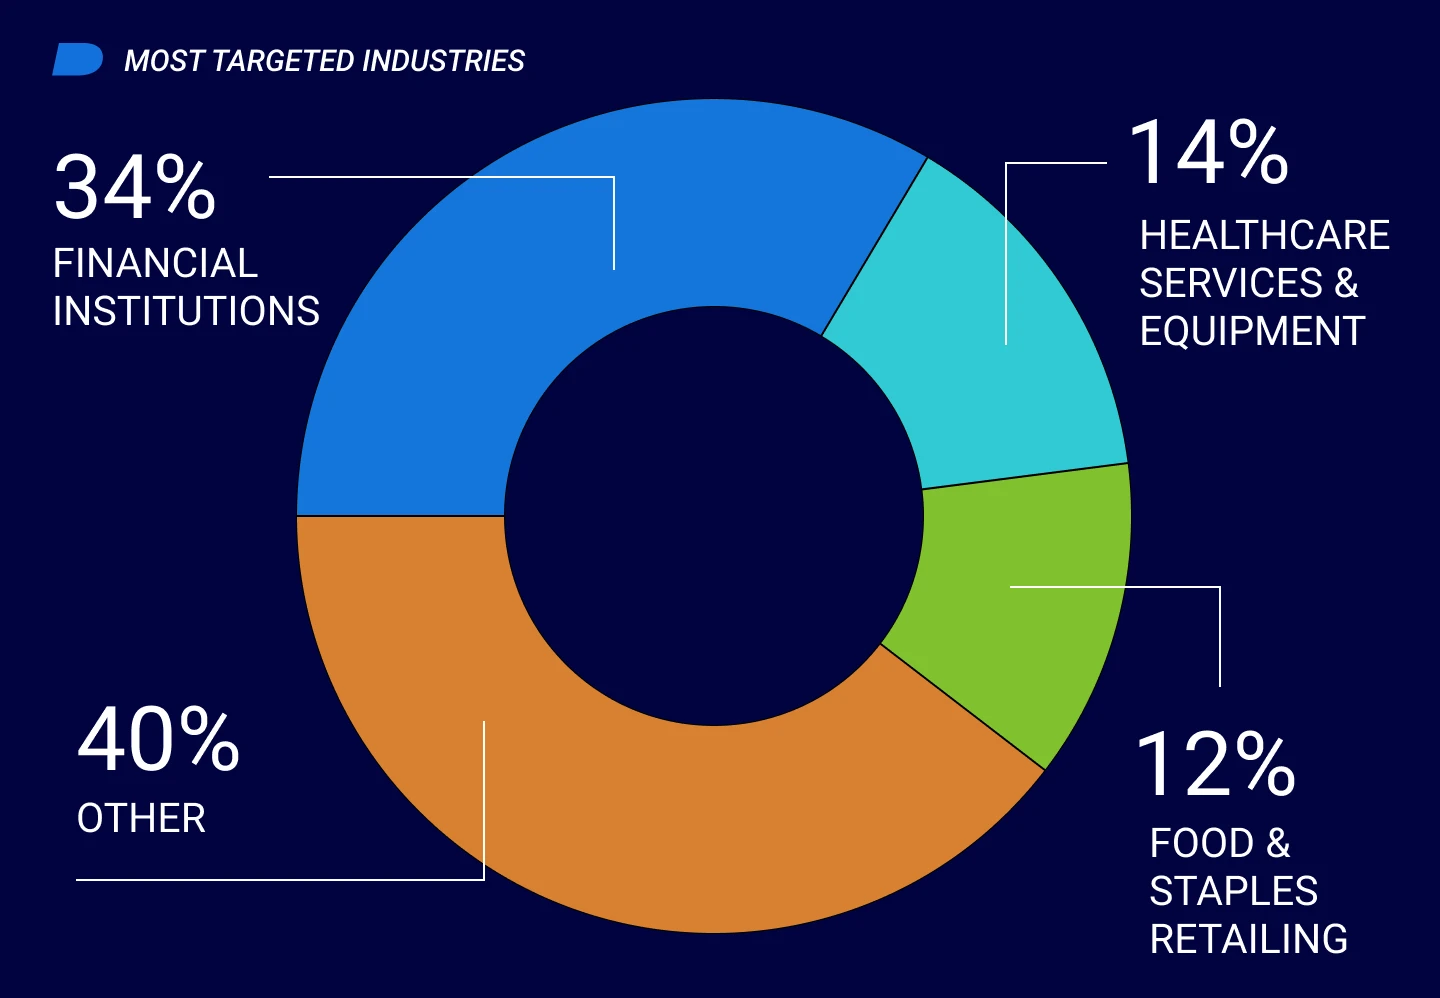 Most Targeted Industries by Number of Attacks